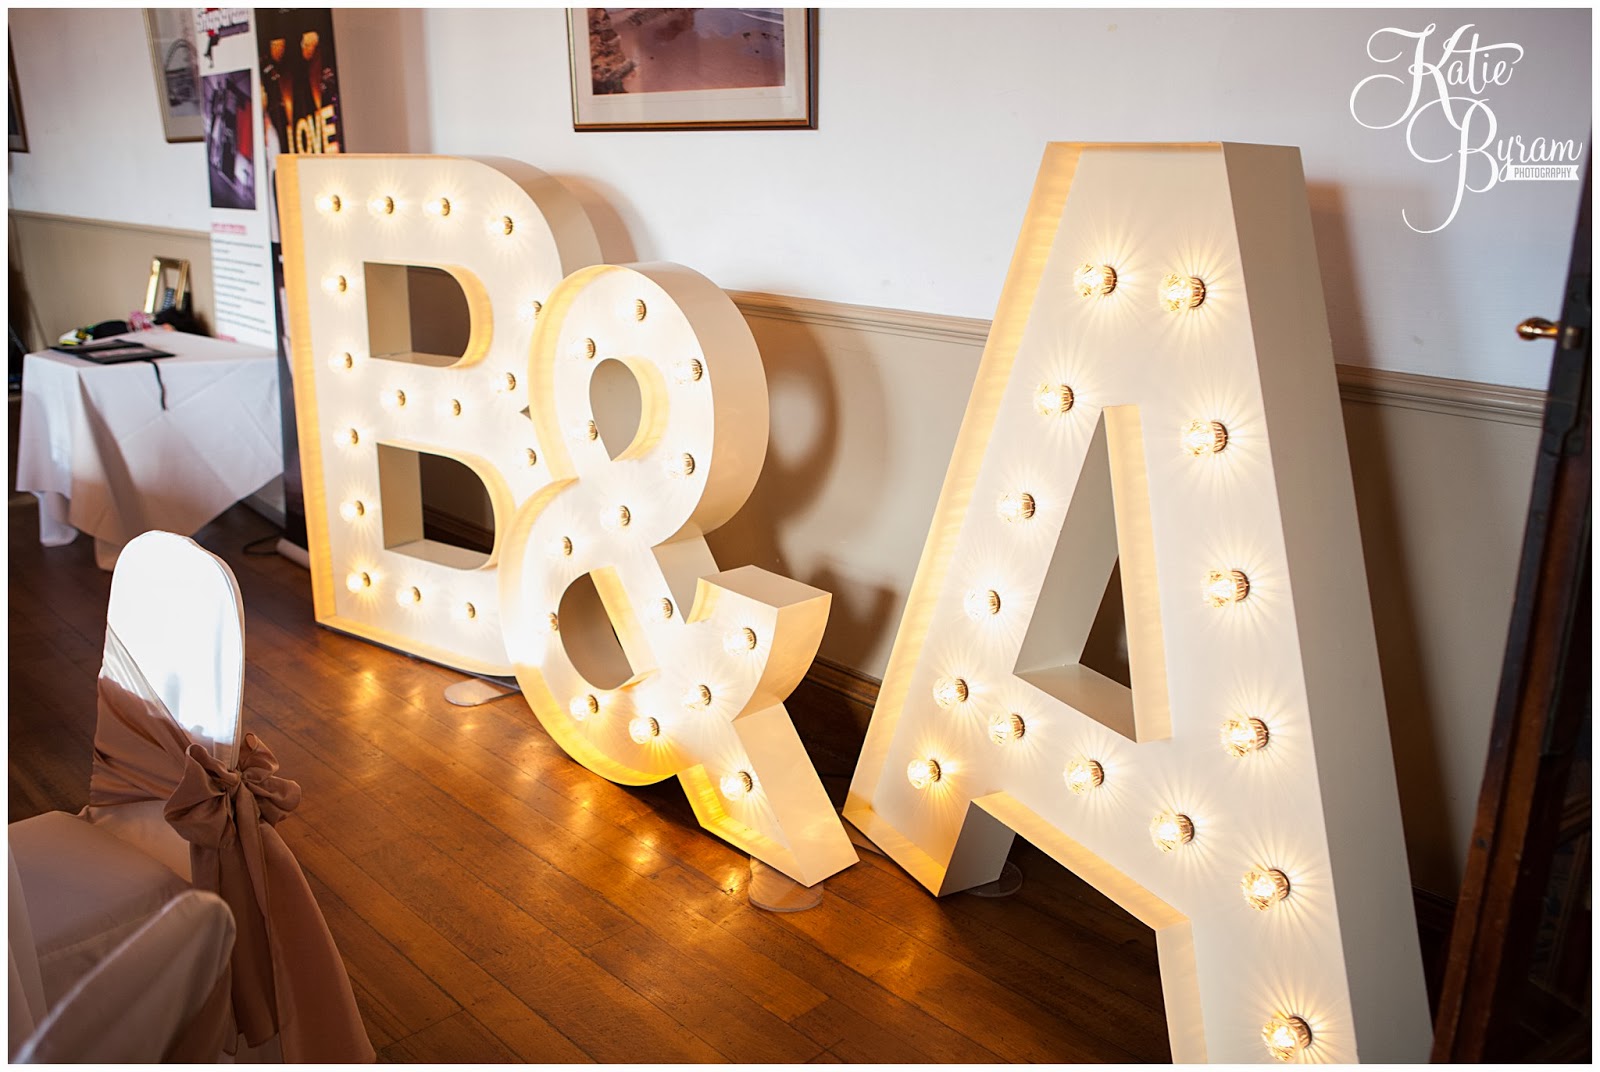 coco luminaire, light up letters wedding, kirkley hall wedding fair, kirkley hall wedding, kirkley hall wedding showcase, katie byram photography, by wendy stationery, floral quarter, mark deeks music, northumberland wedding venue, 